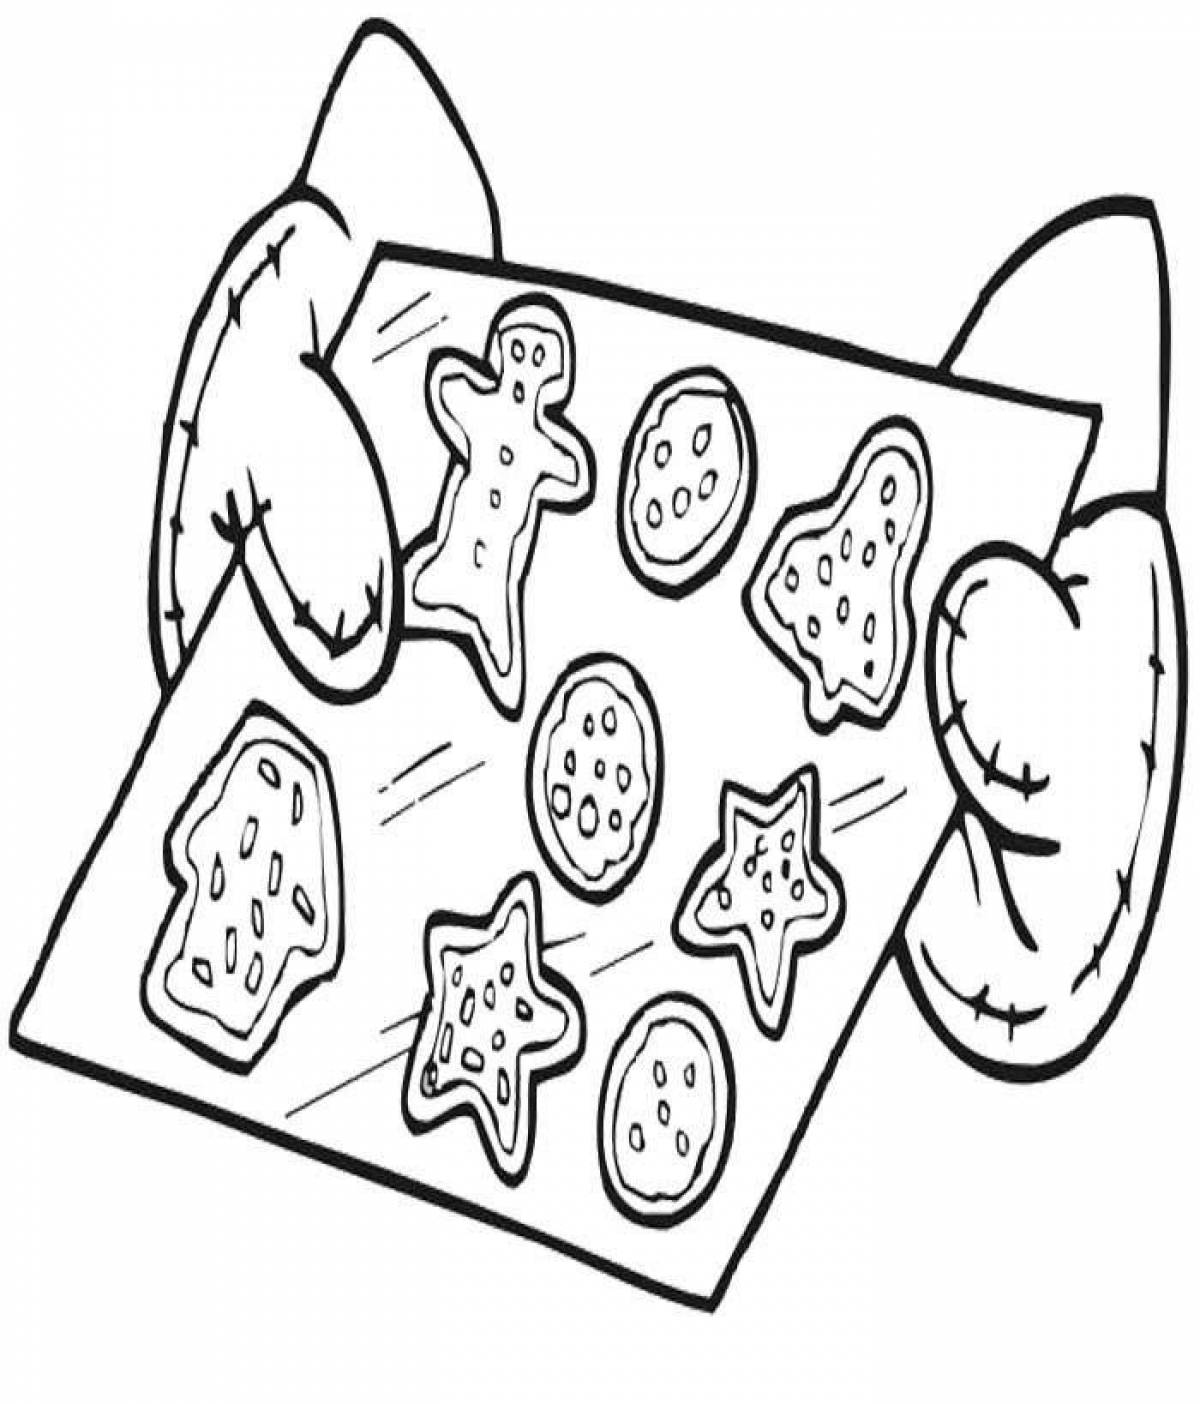 Living cookie coloring page